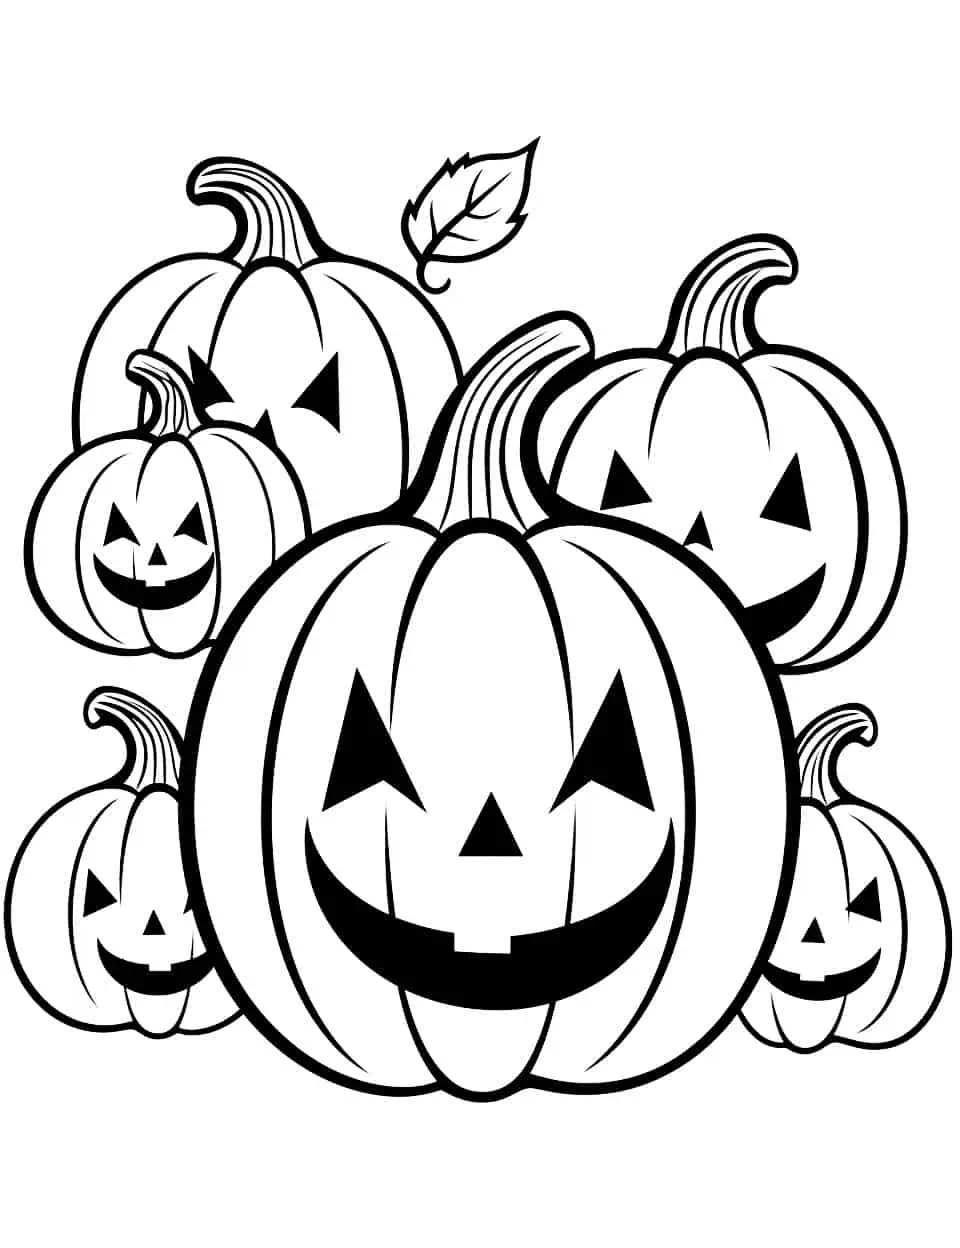 Happy Pumpkin Faces Coloring Page - A collection of pumpkins with different happy expressions, emphasizing the joyful spirit of fall.